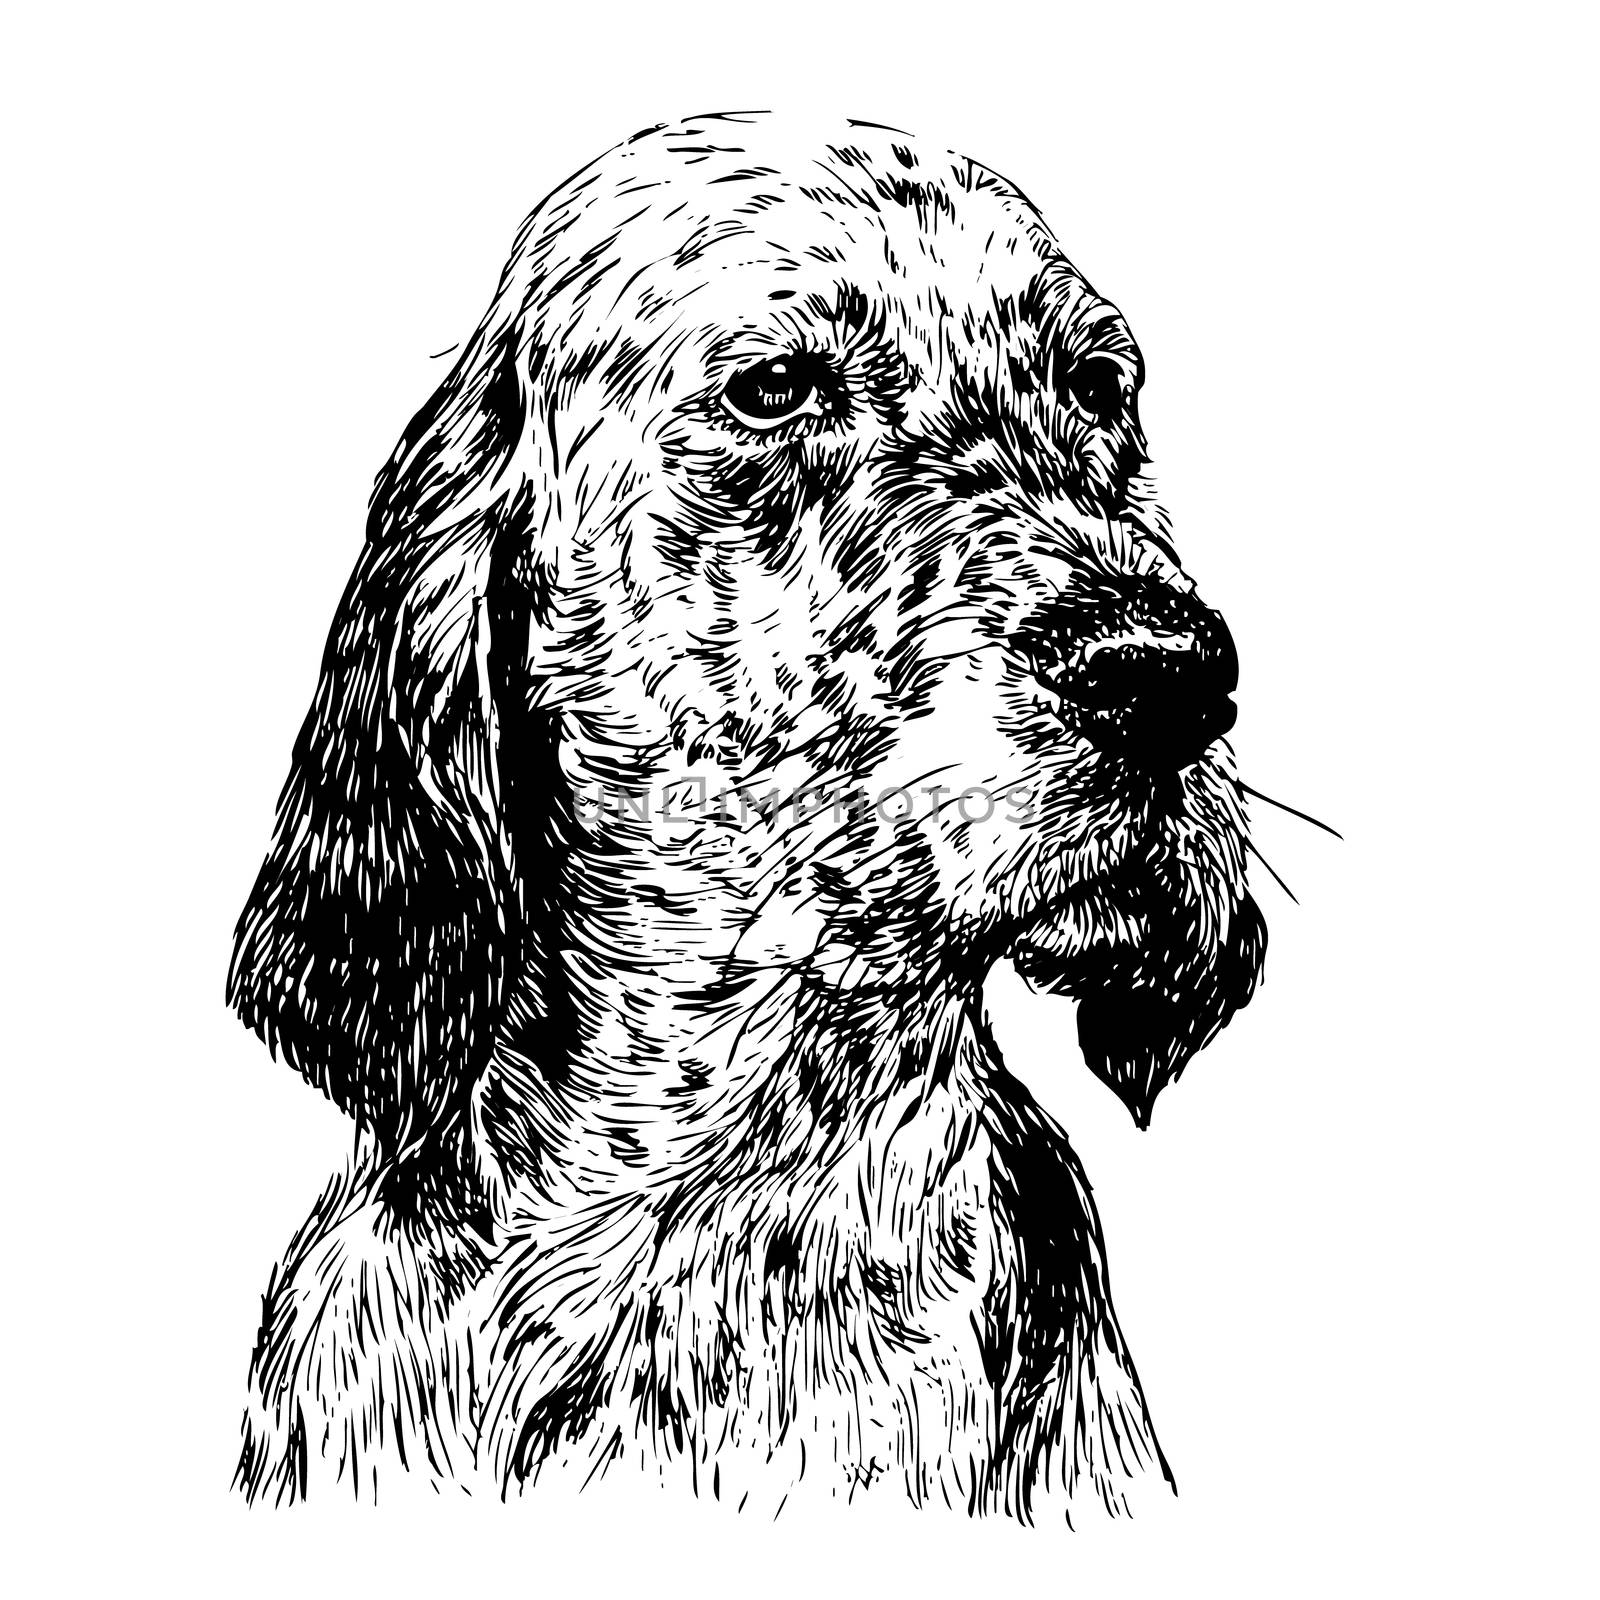 English setter by simpleBE